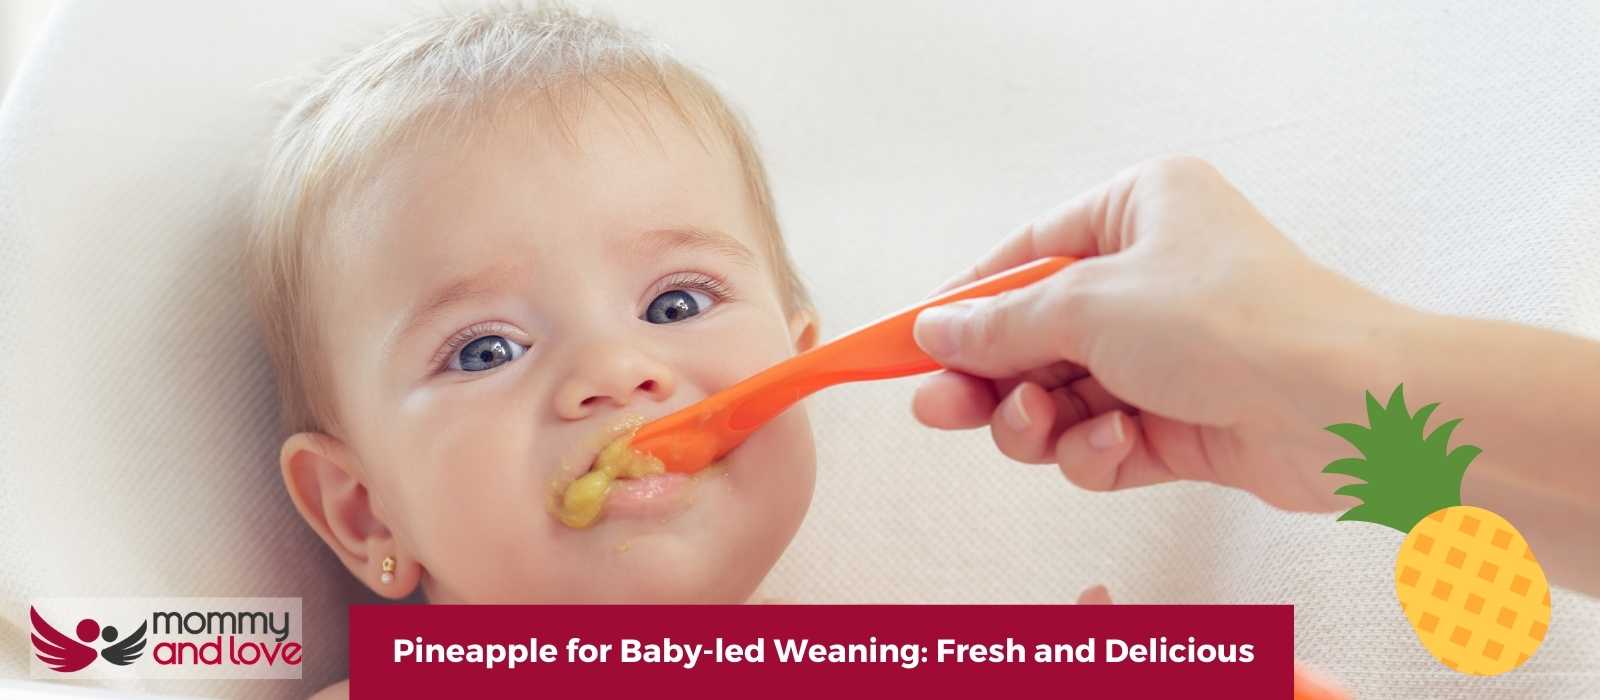 Pineapple for Baby-led Weaning Fresh and Delicious